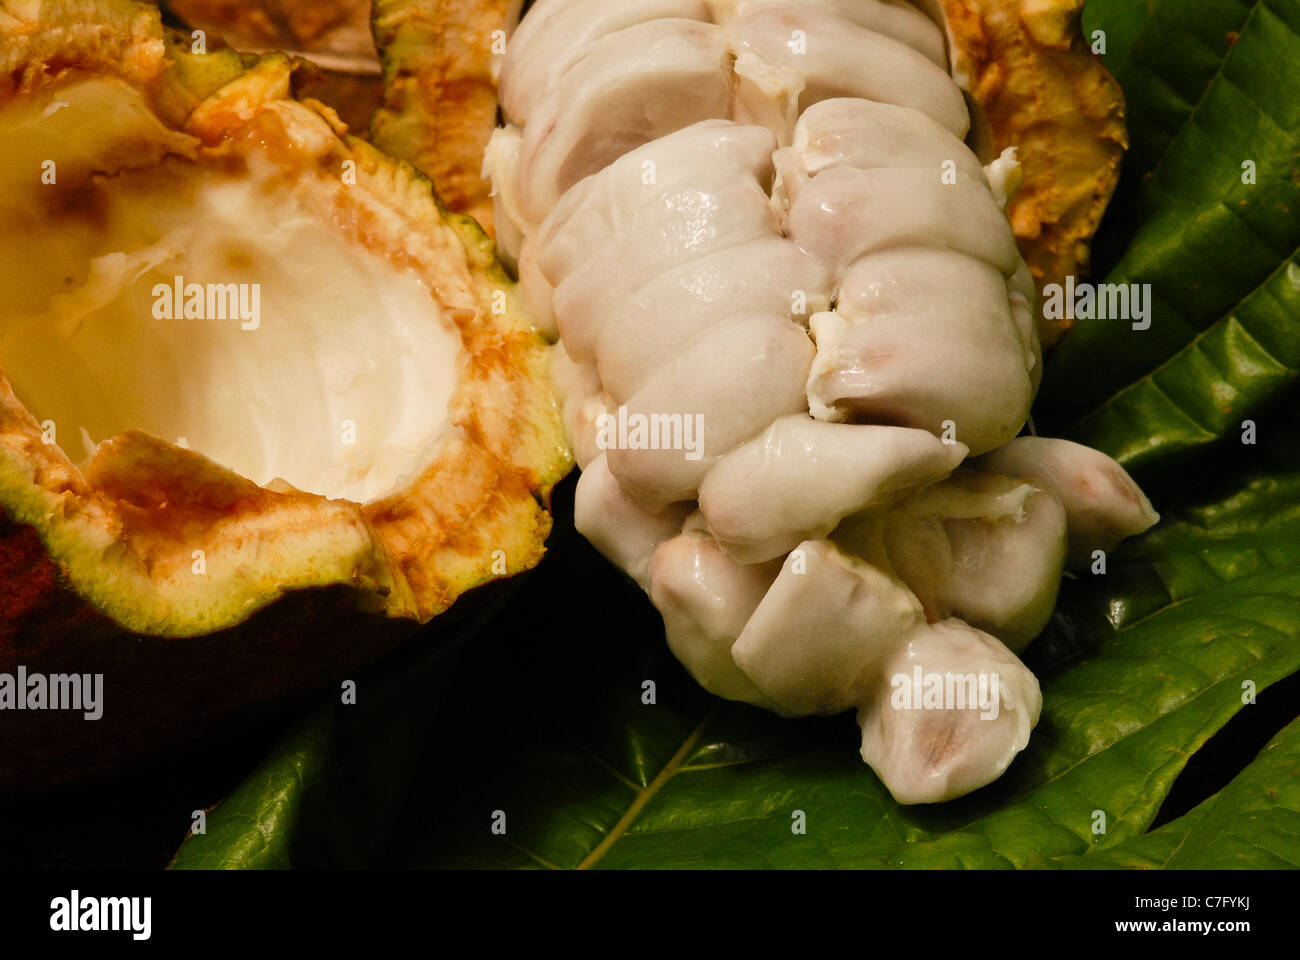 Cocoa beans in a freshly cut cocoa pod. Sao Tome and Principe, Africa. Stock Photo